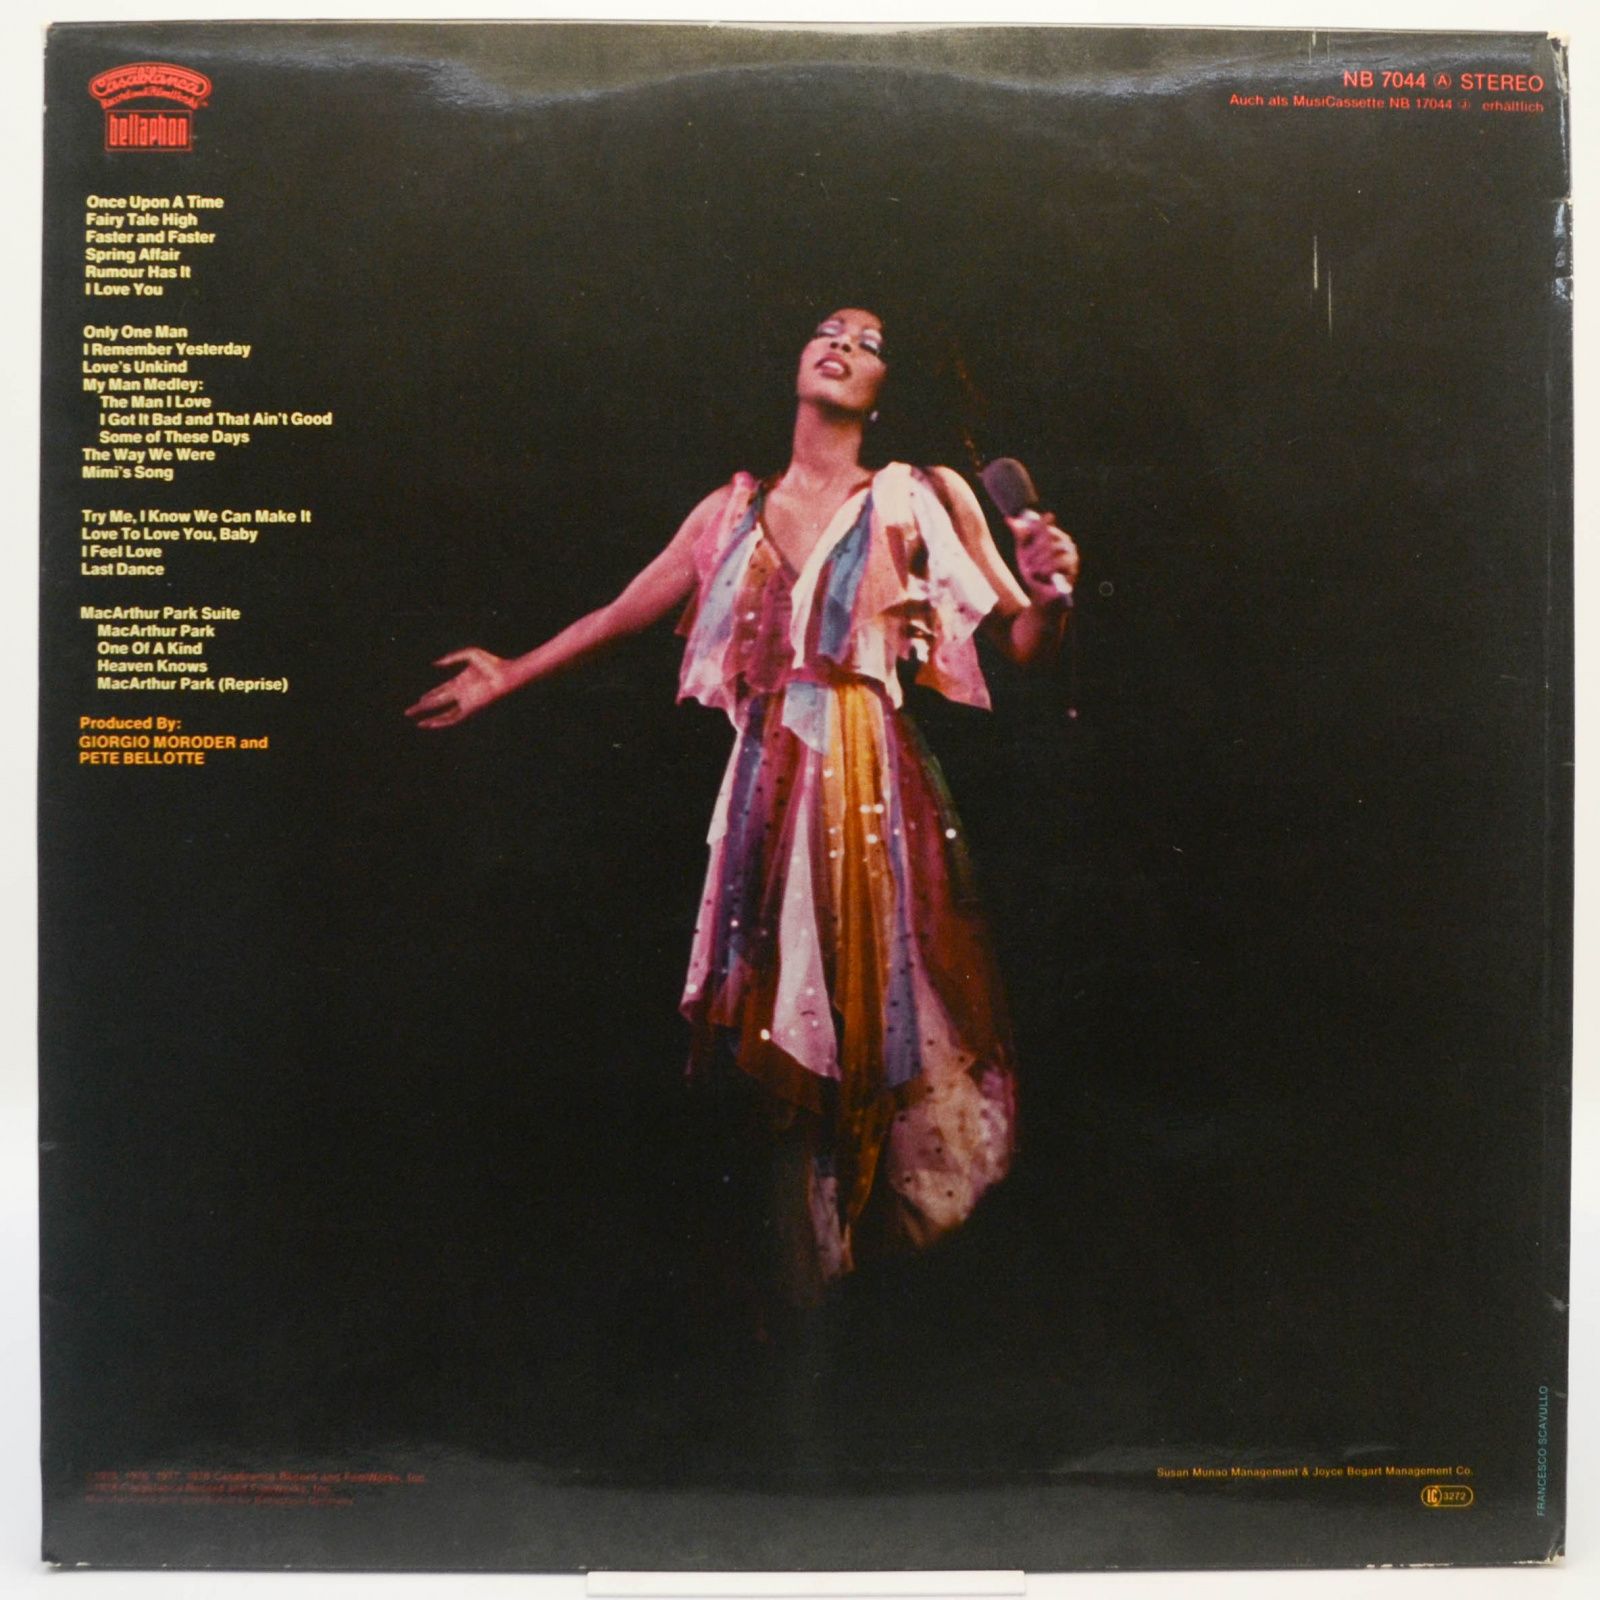 Donna Summer — Live And More (2LP), 1978